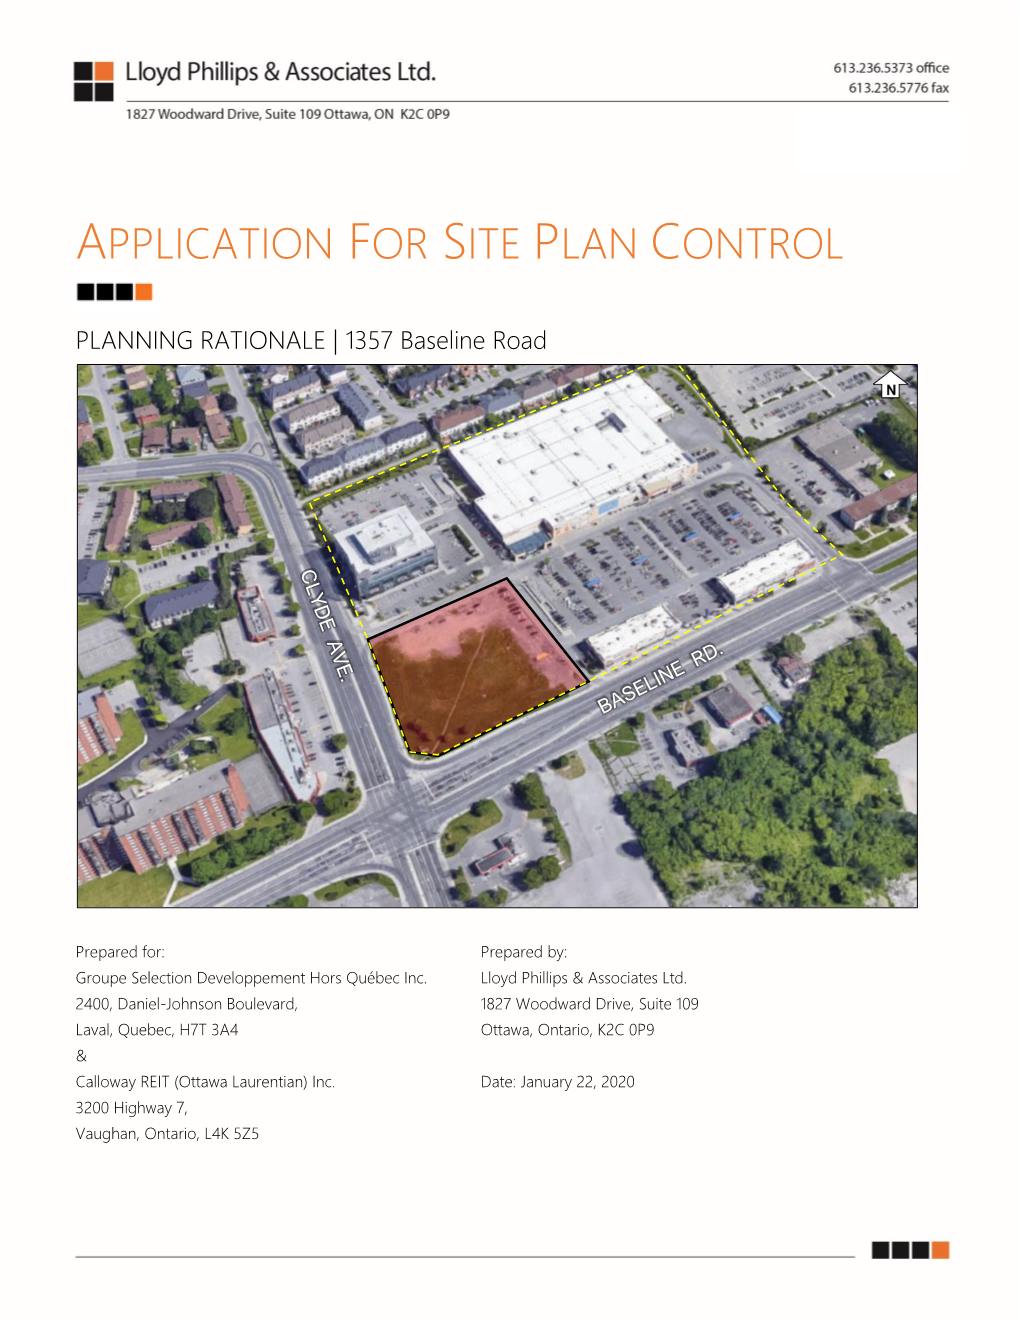 Application for Site Plan Control